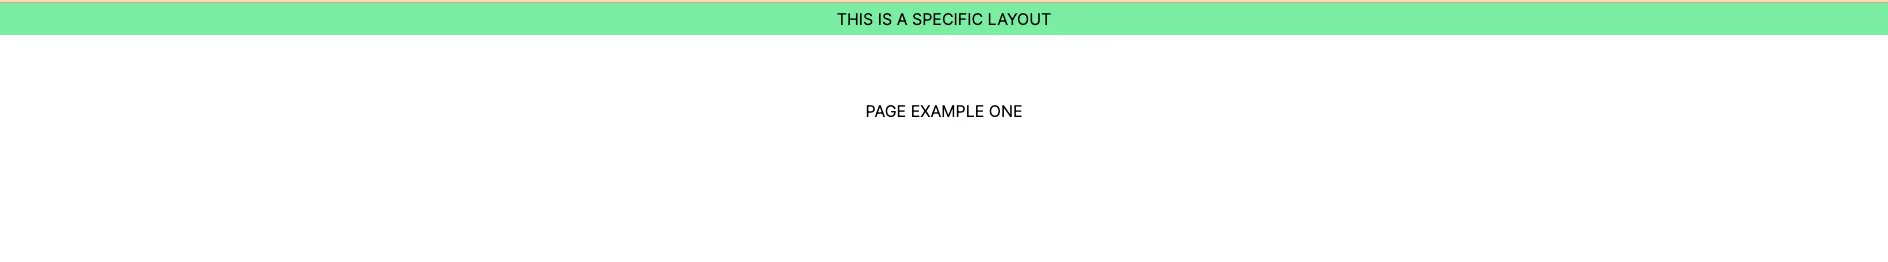 pages with different root layouts